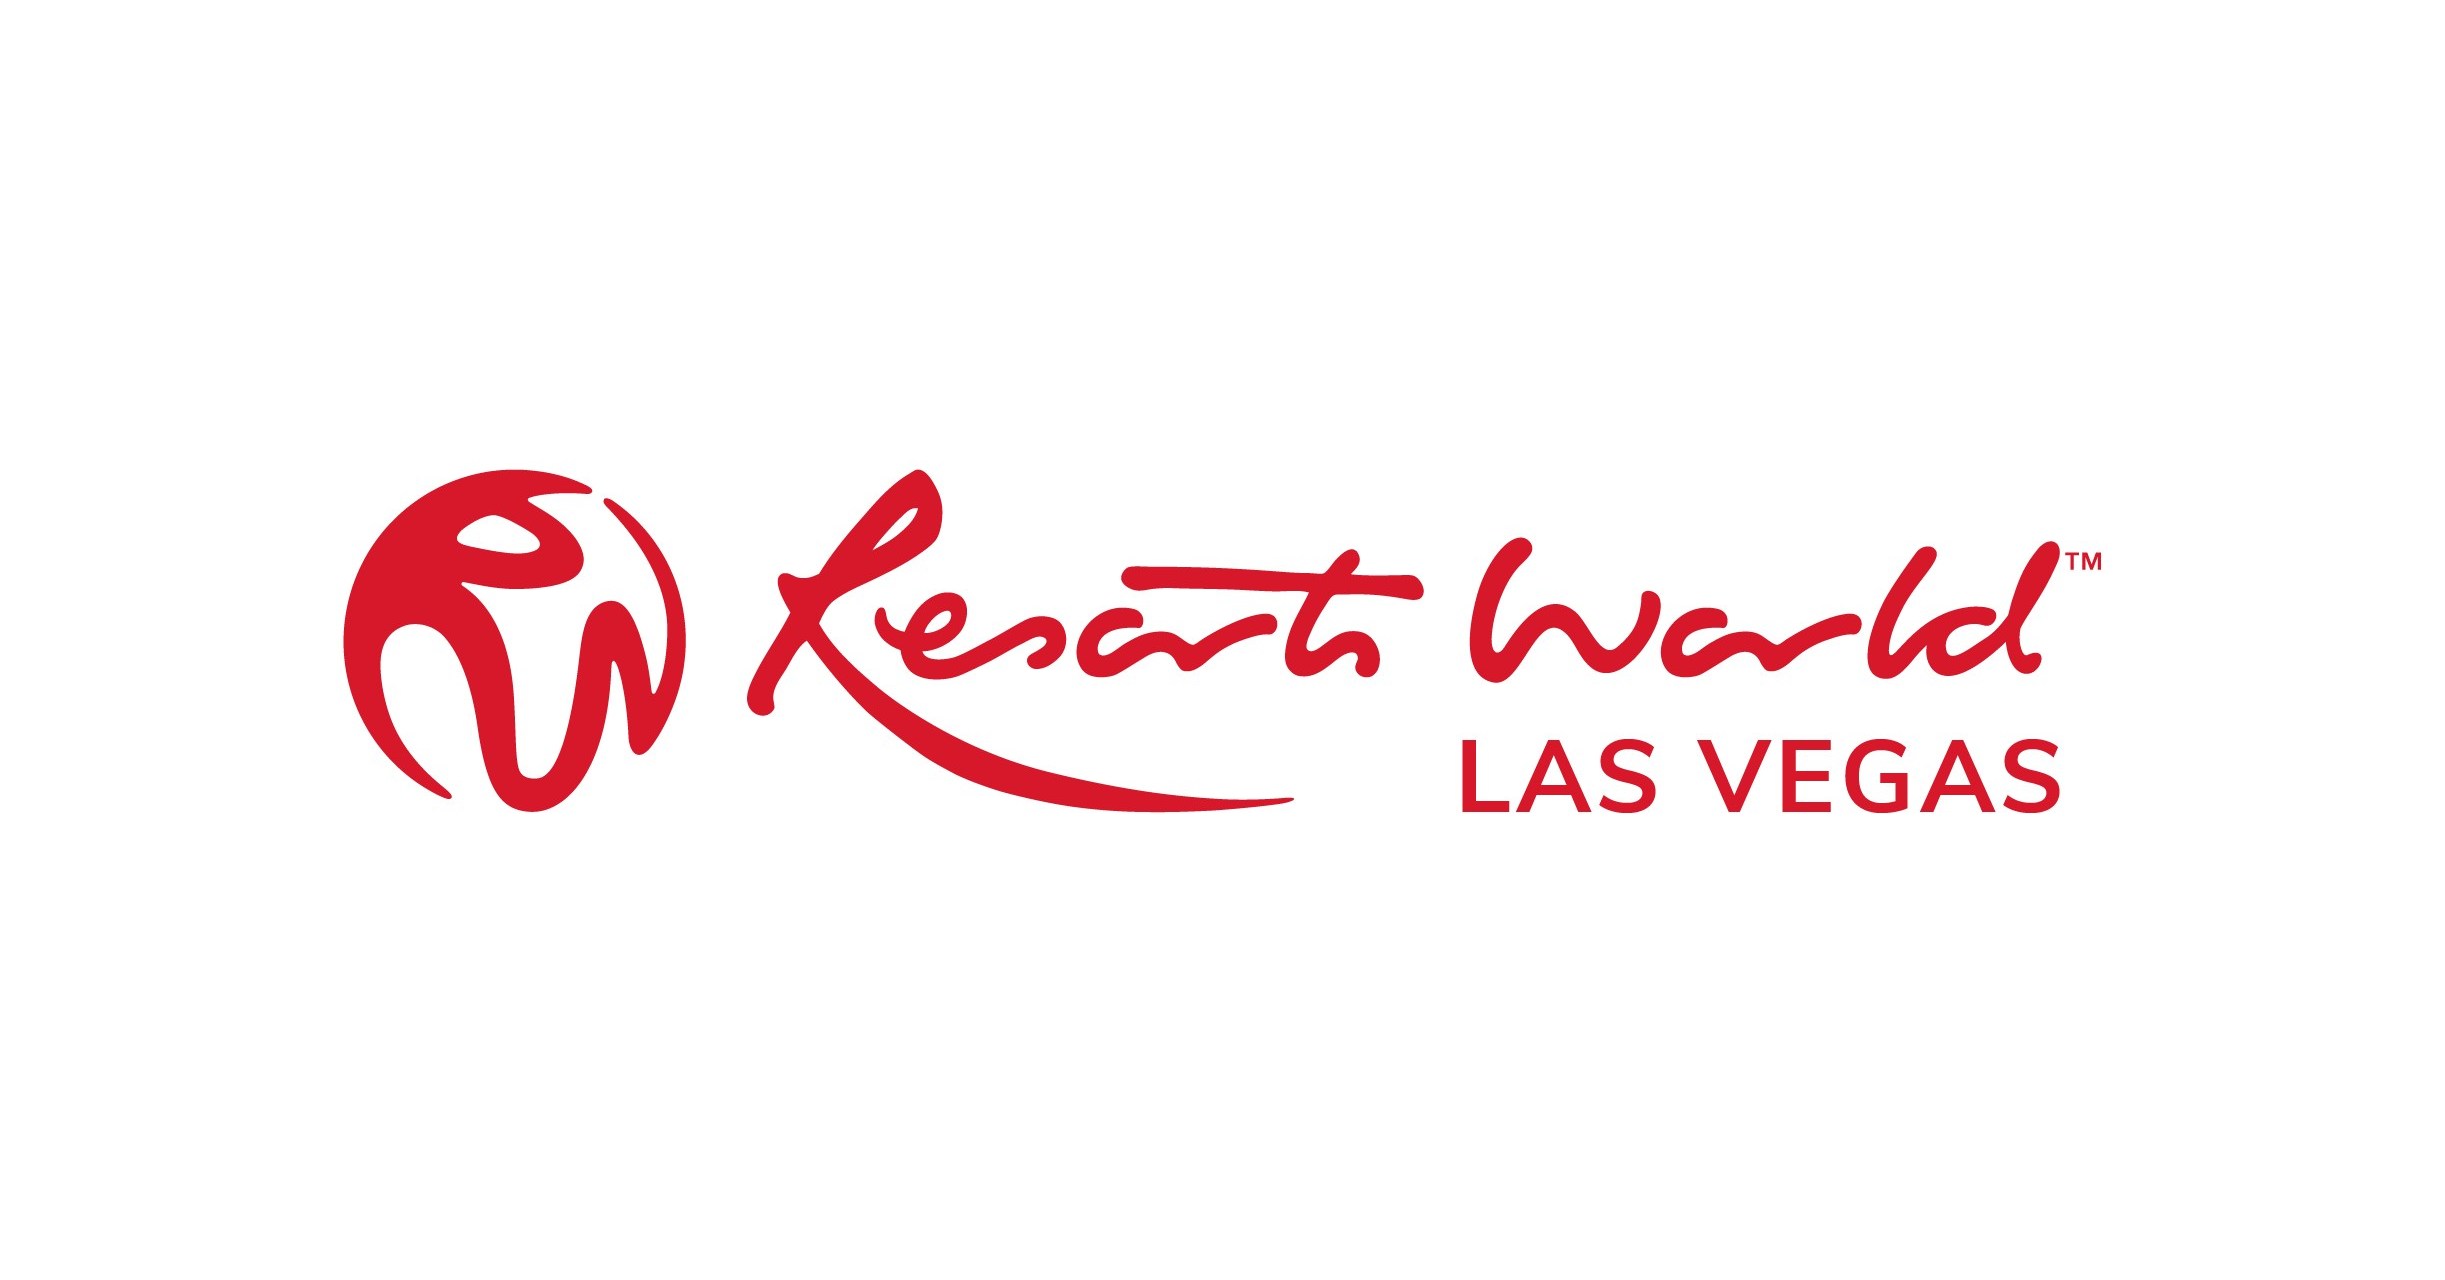 RESORTS WORLD LAS VEGAS AND THE BORING COMPANY OFFICIALLY OPEN PROPERTY'S  PASSENGER STATION, PROVIDING DIRECT ACCESS TO THE LAS VEGAS CONVENTION  CENTER